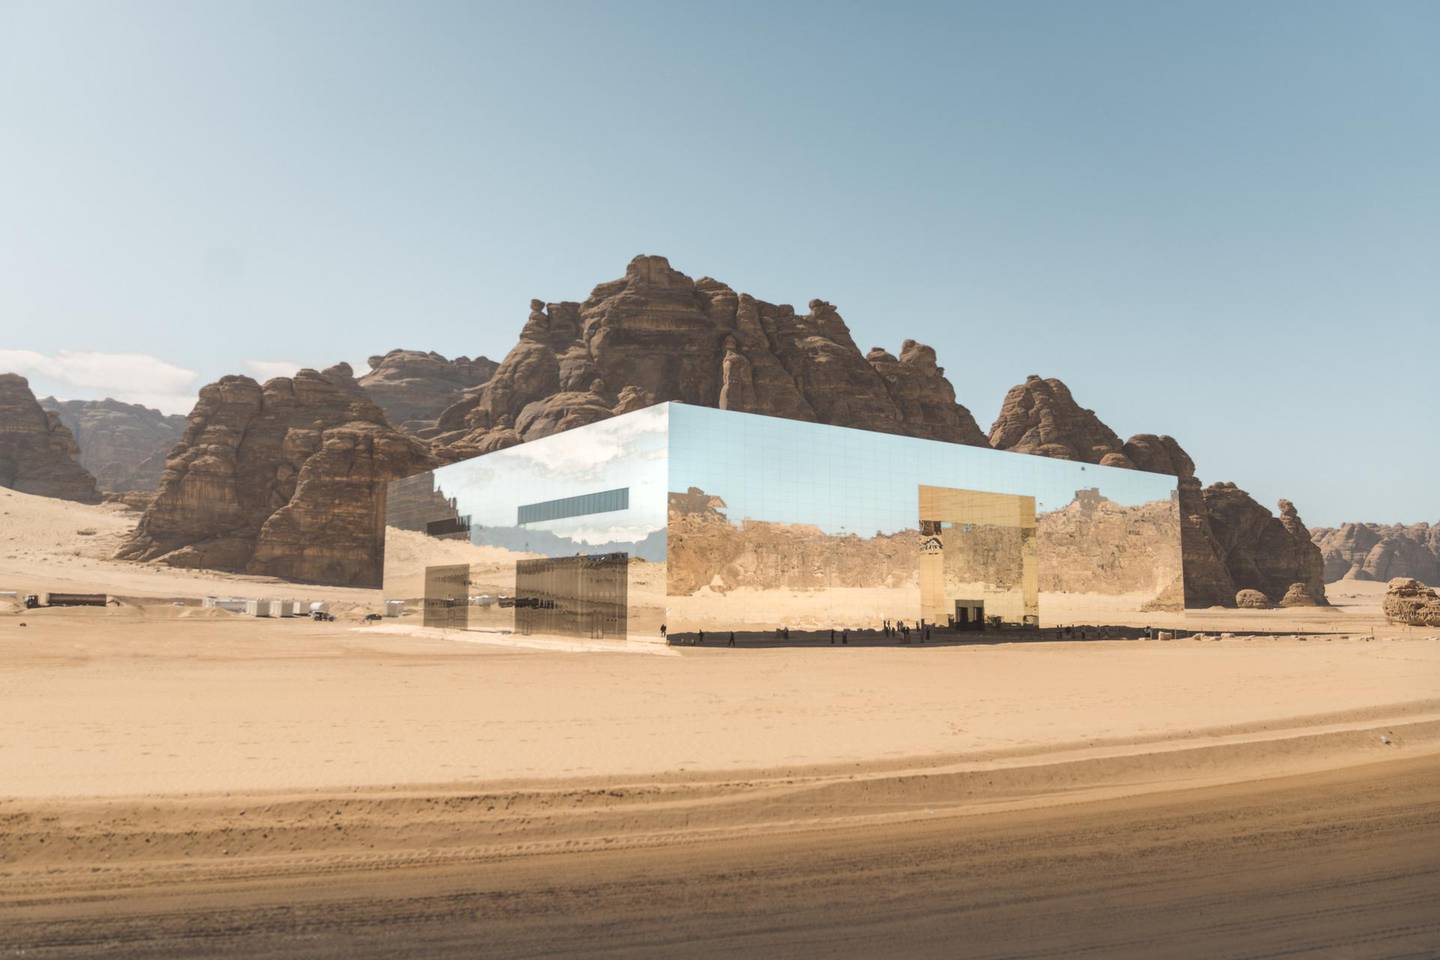 The resort is located close to Maraya, the biggest mirrored building in the world. Courtesy RCU